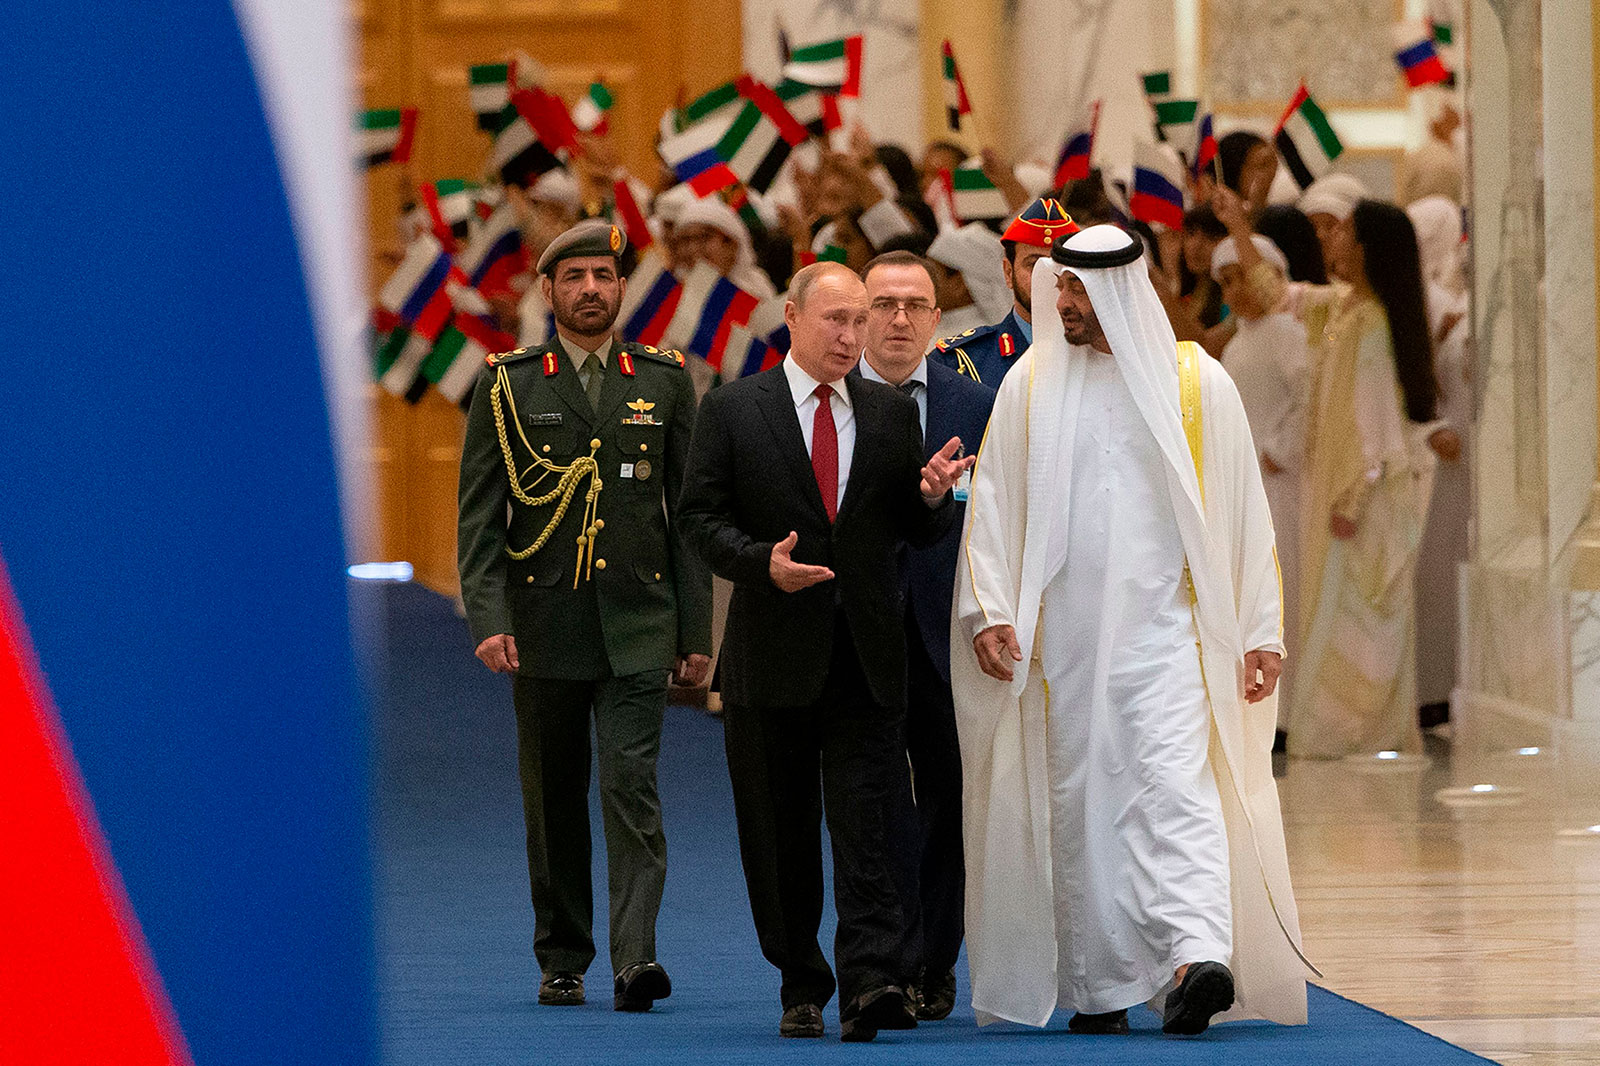 Russian President Vladimir Putin and Abu Dhabi Crown Prince Mohammed bin Zayed al-Nahyan signed a slew of investment deals during a visit in October 2019.